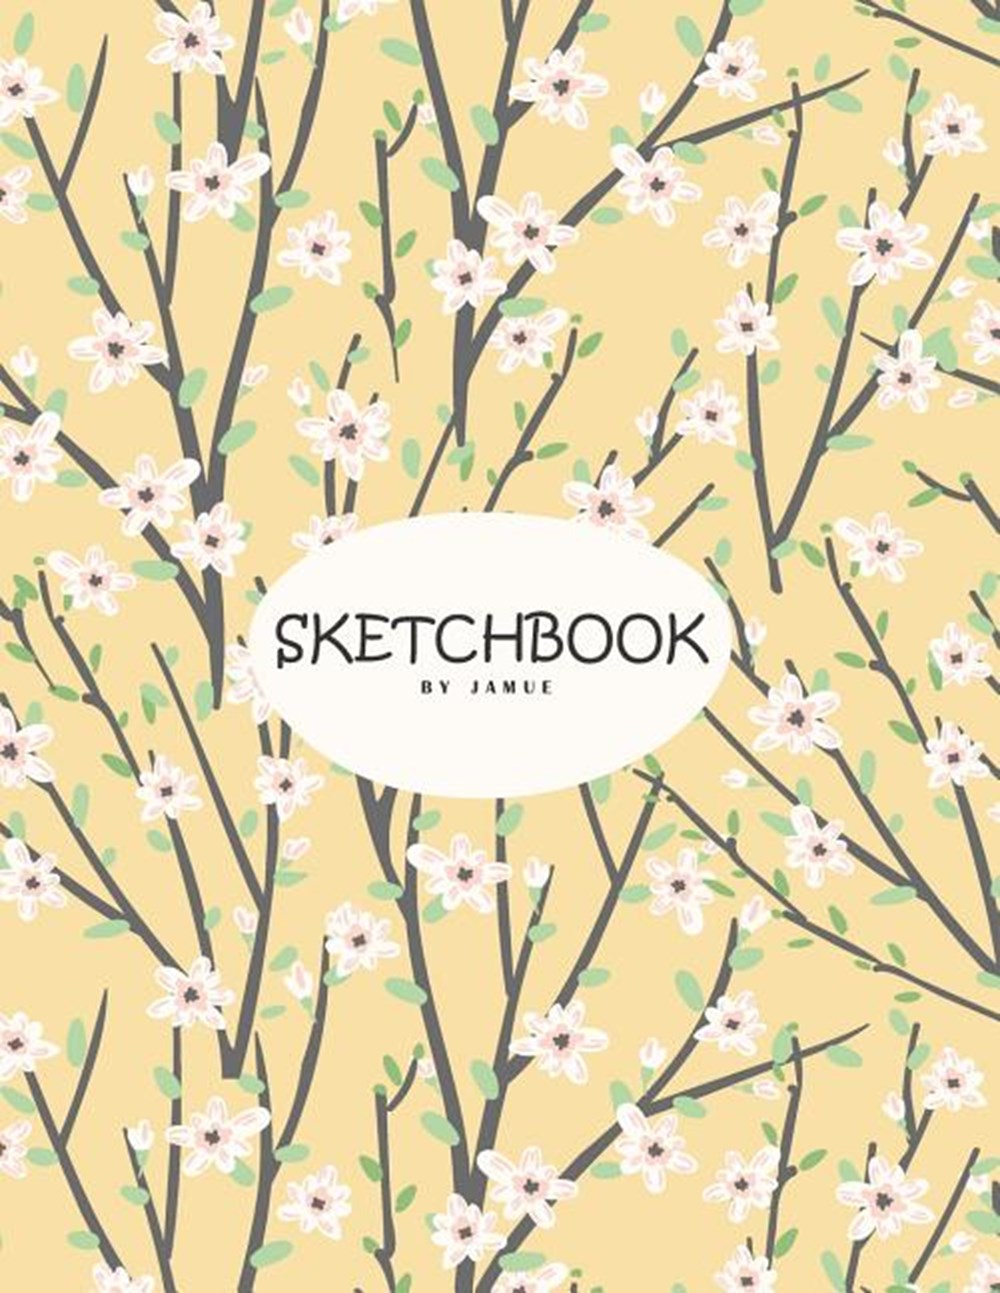 Sketchbook Character cute cat sitting blue cover (8.5 x 11) inches 110 pages, Blank Unlined Paper fo